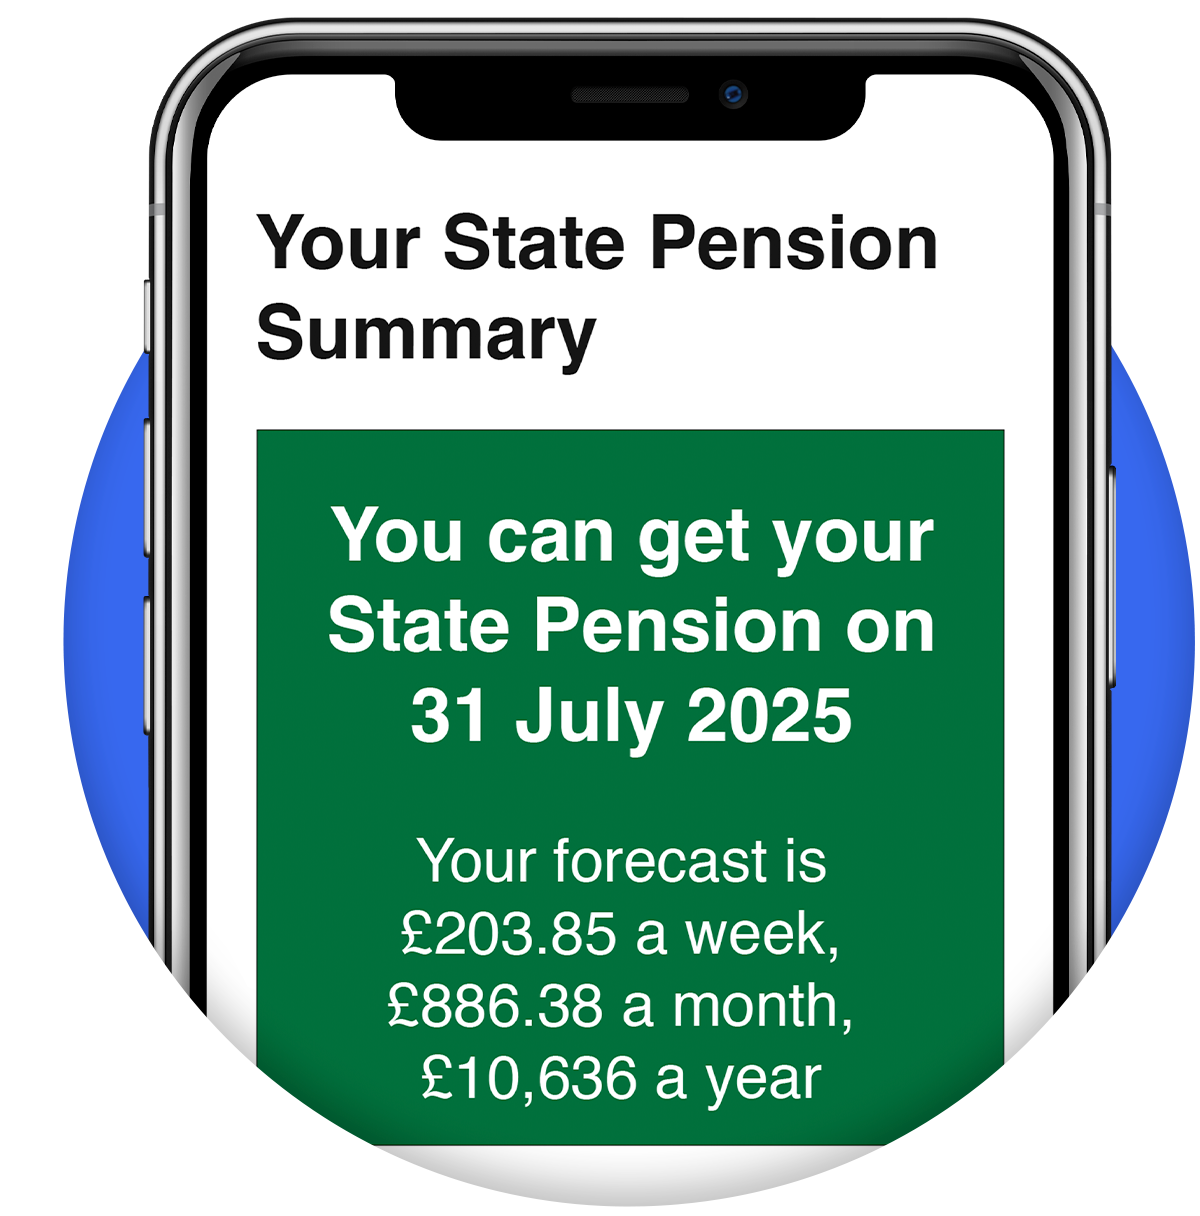 A phone screen reading: "Your state pension summary. You can get your state pension on 31 July 2025. You forecast is £203.85 a week, £886.38 a month, £10,636 a year." Image links to our buying national insurance years guide.